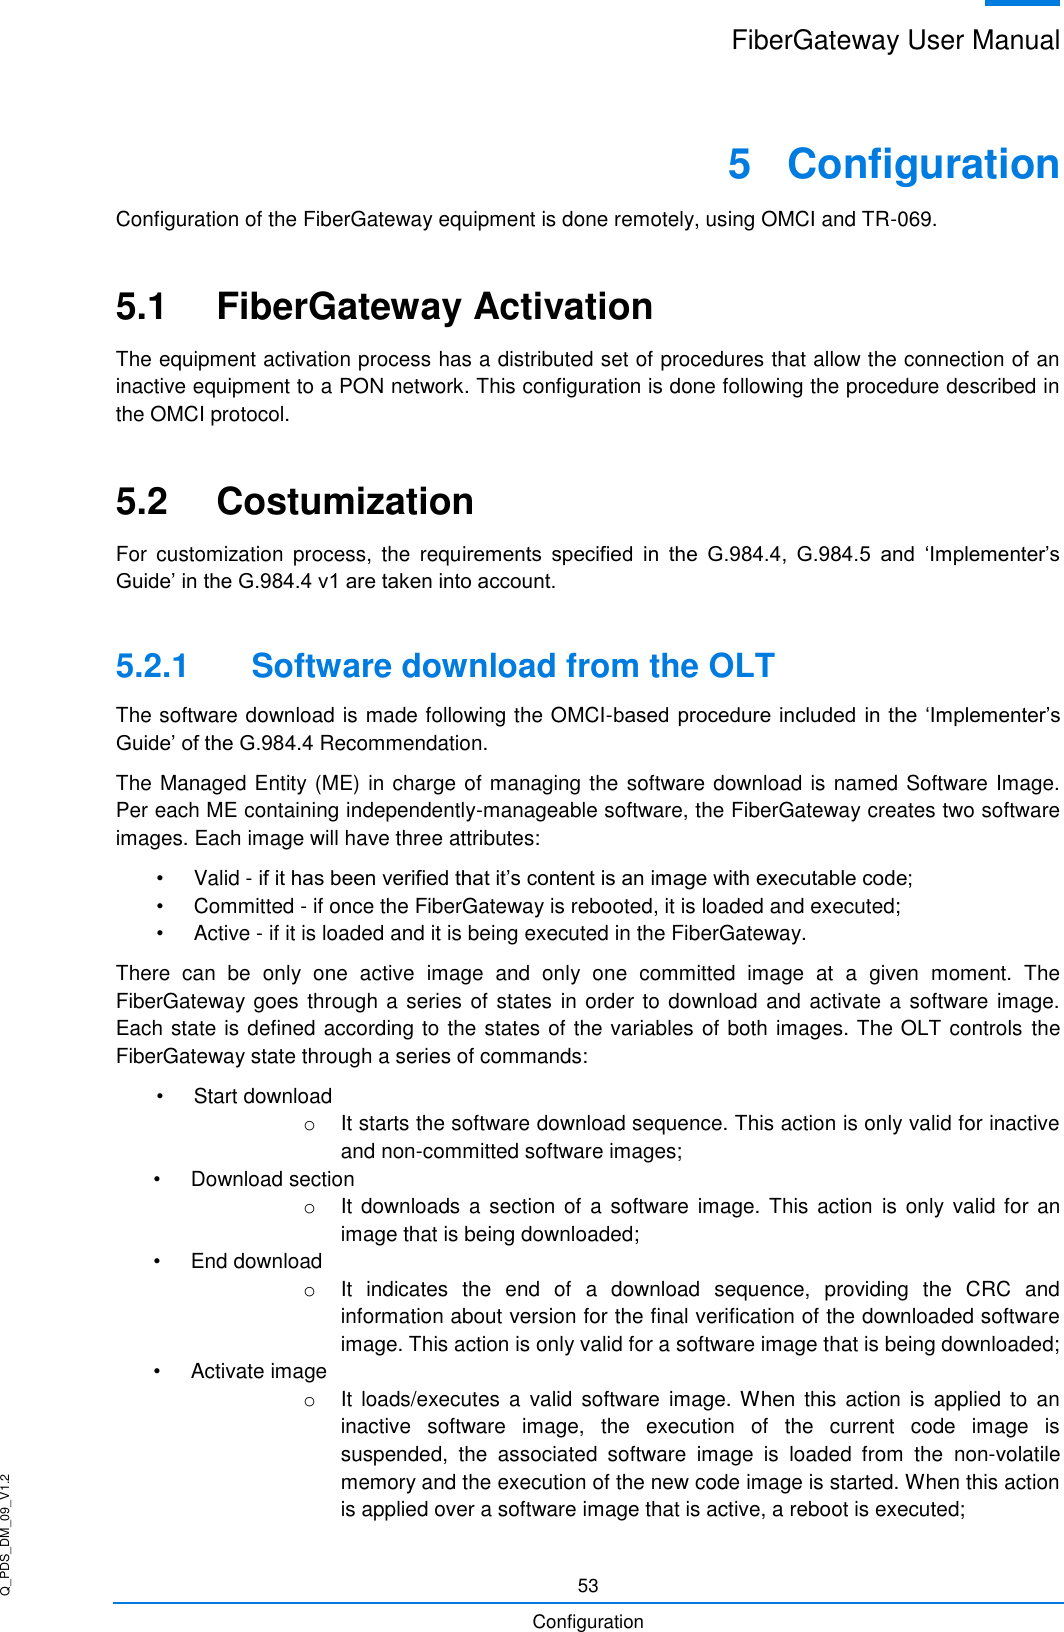 Q_PDS_DM_09_V1.2 FiberGateway User Manual  53 Configuration 5  Configuration Configuration of the FiberGateway equipment is done remotely, using OMCI and TR-069. 5.1  FiberGateway Activation The equipment activation process has a distributed set of procedures that allow the connection of an inactive equipment to a PON network. This configuration is done following the procedure described in the OMCI protocol. 5.2  Costumization For  customization  process,  the  requirements  specified  in  the  G.984.4,  G.984.5  and  ‘Implementer’s Guide’ in the G.984.4 v1 are taken into account. 5.2.1  Software download from the OLT The software download is made following the OMCI-based procedure included in the  ‘Implementer’s Guide’ of the G.984.4 Recommendation. The Managed Entity (ME) in charge of managing the software download is named Software Image. Per each ME containing independently-manageable software, the FiberGateway creates two software images. Each image will have three attributes: •  Valid - if it has been verified that it’s content is an image with executable code; •  Committed - if once the FiberGateway is rebooted, it is loaded and executed; •  Active - if it is loaded and it is being executed in the FiberGateway. There  can  be  only  one  active  image  and  only  one  committed  image  at  a  given  moment.  The FiberGateway goes through a series of states in order to download  and activate a software image. Each state is defined according to the states of the variables of both images. The OLT controls  the FiberGateway state through a series of commands: •  Start download o  It starts the software download sequence. This action is only valid for inactive and non-committed software images; •  Download section o  It downloads  a section of  a software  image. This action  is only valid  for an image that is being downloaded; •  End download o  It  indicates  the  end  of  a  download  sequence,  providing  the  CRC  and information about version for the final verification of the downloaded software image. This action is only valid for a software image that is being downloaded; •  Activate image o  It loads/executes  a  valid  software  image. When  this action  is applied  to  an inactive  software  image,  the  execution  of  the  current  code  image  is suspended,  the  associated  software  image  is  loaded  from  the  non-volatile memory and the execution of the new code image is started. When this action is applied over a software image that is active, a reboot is executed; 